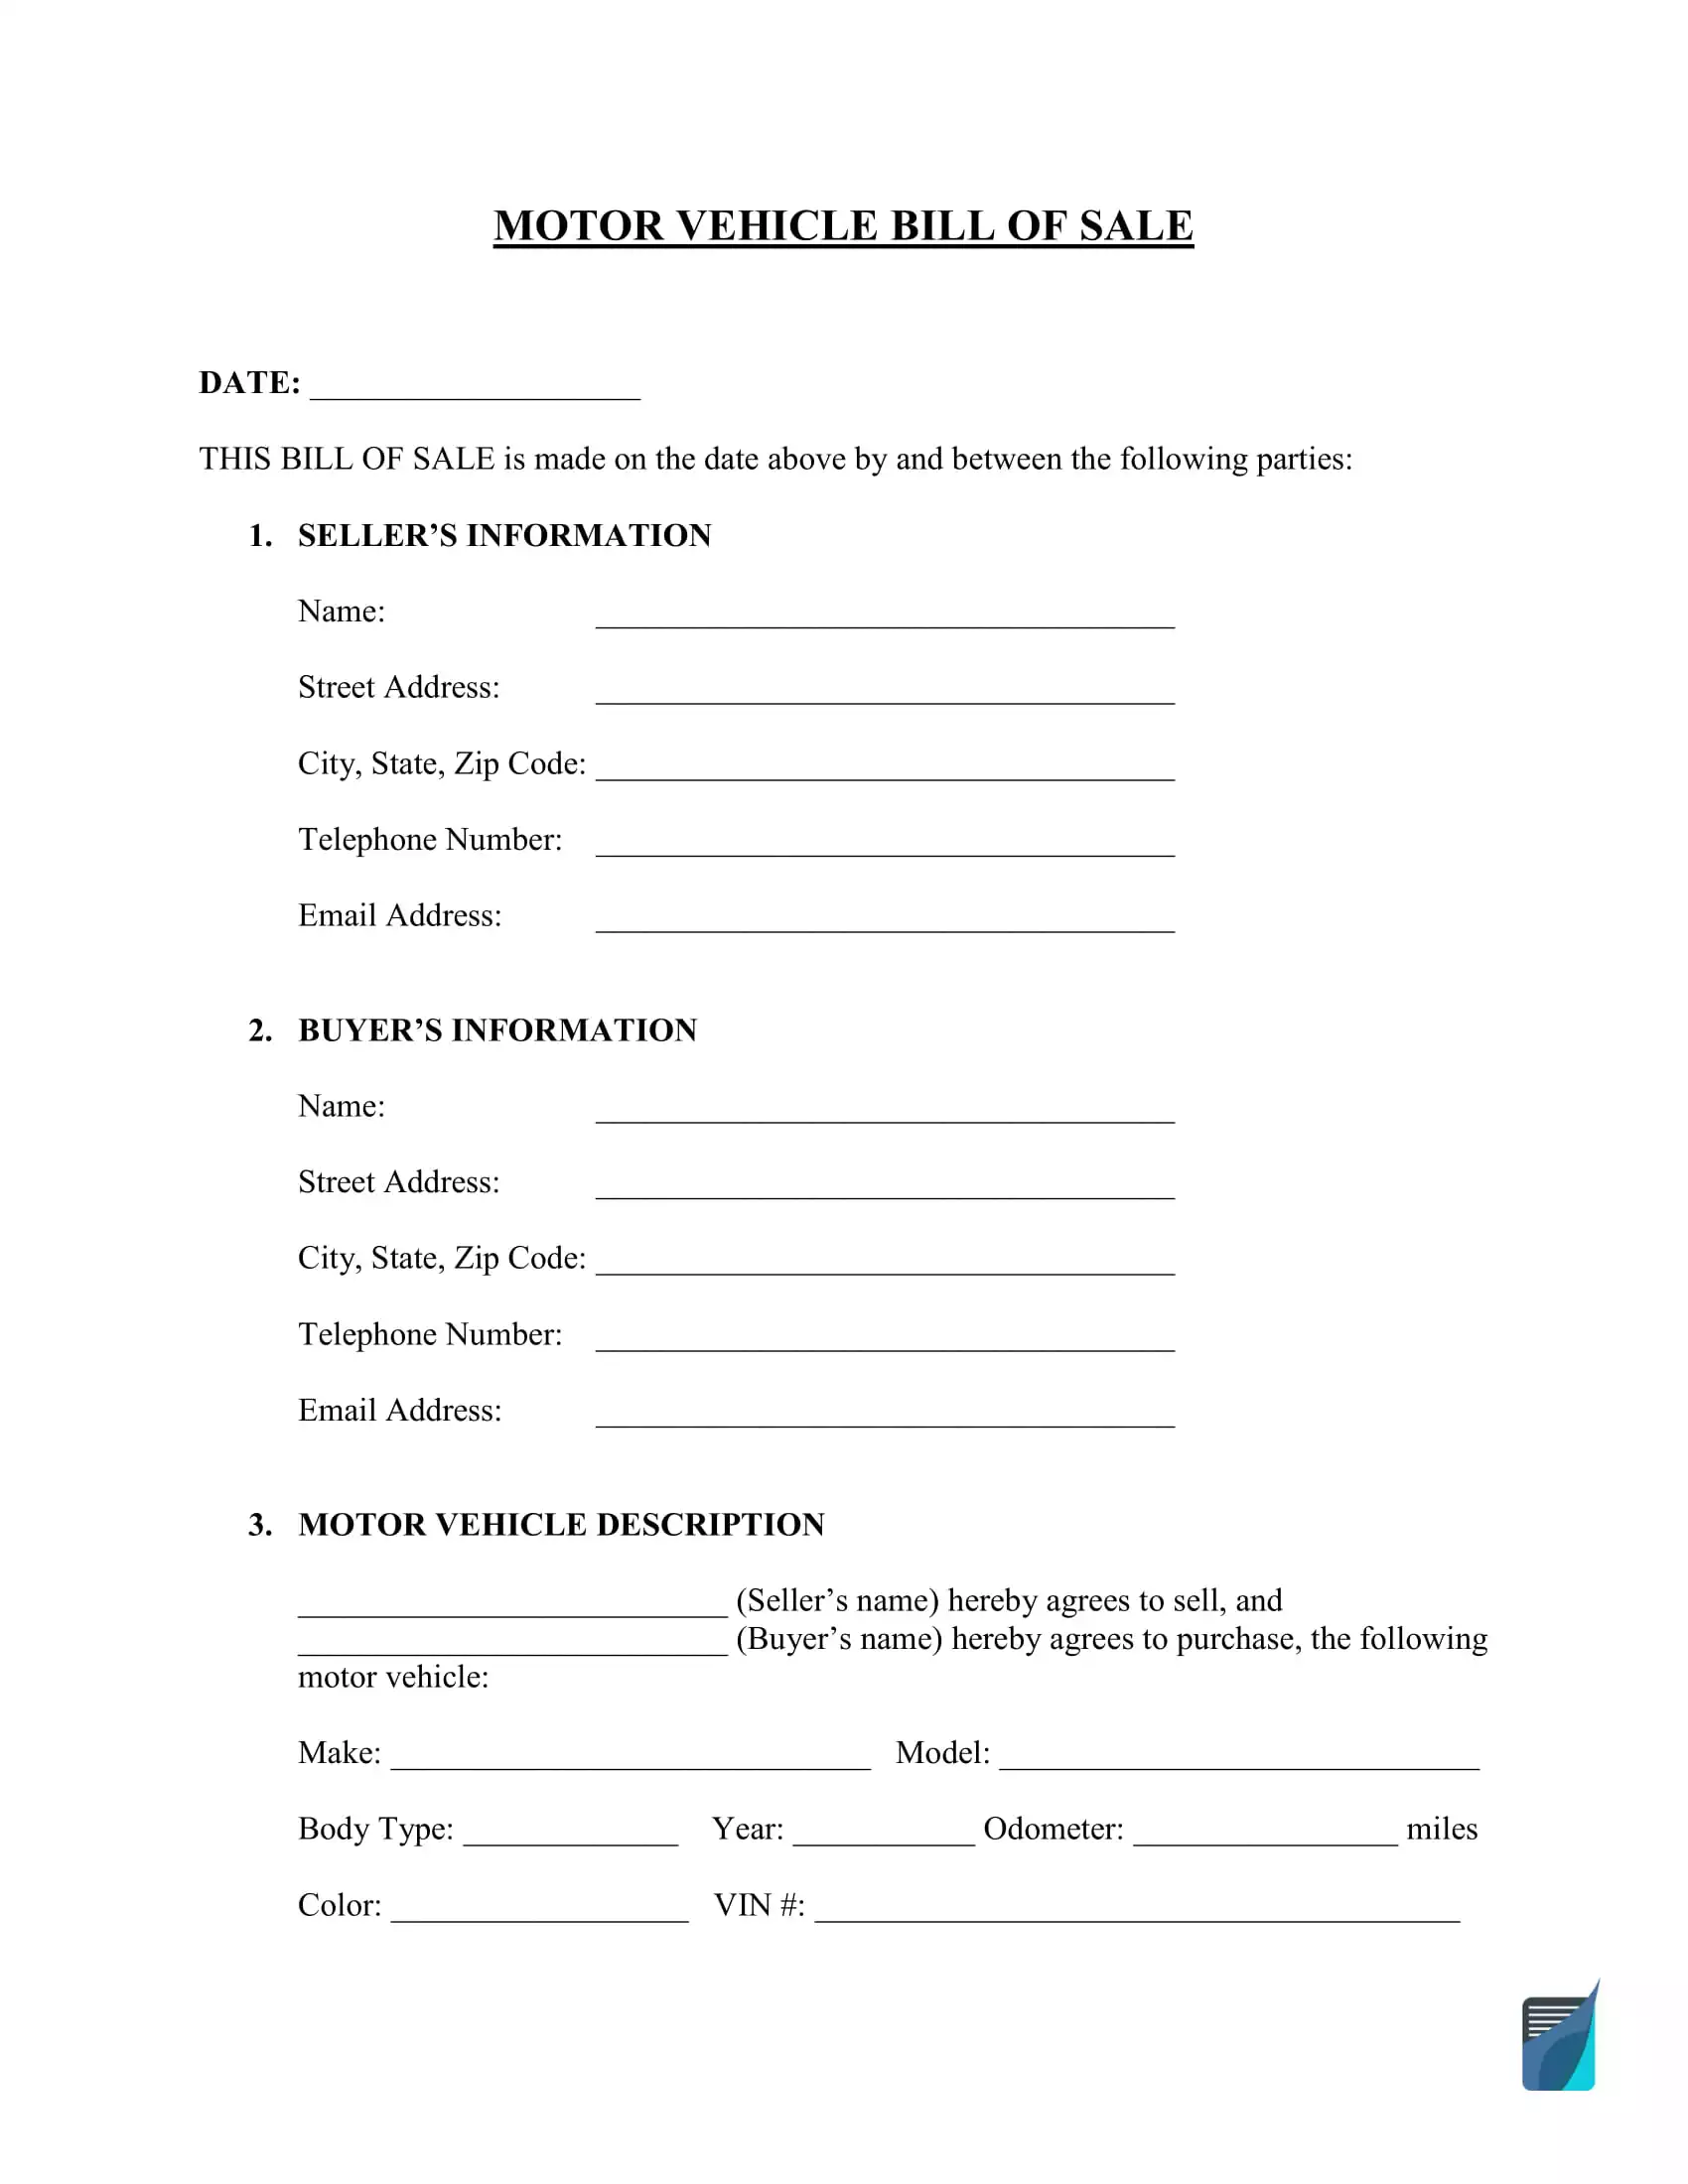 Bill of Sale Template - Free PDF  Word Forms - FormsPal Regarding Vehicle Bill Of Sale Template Word